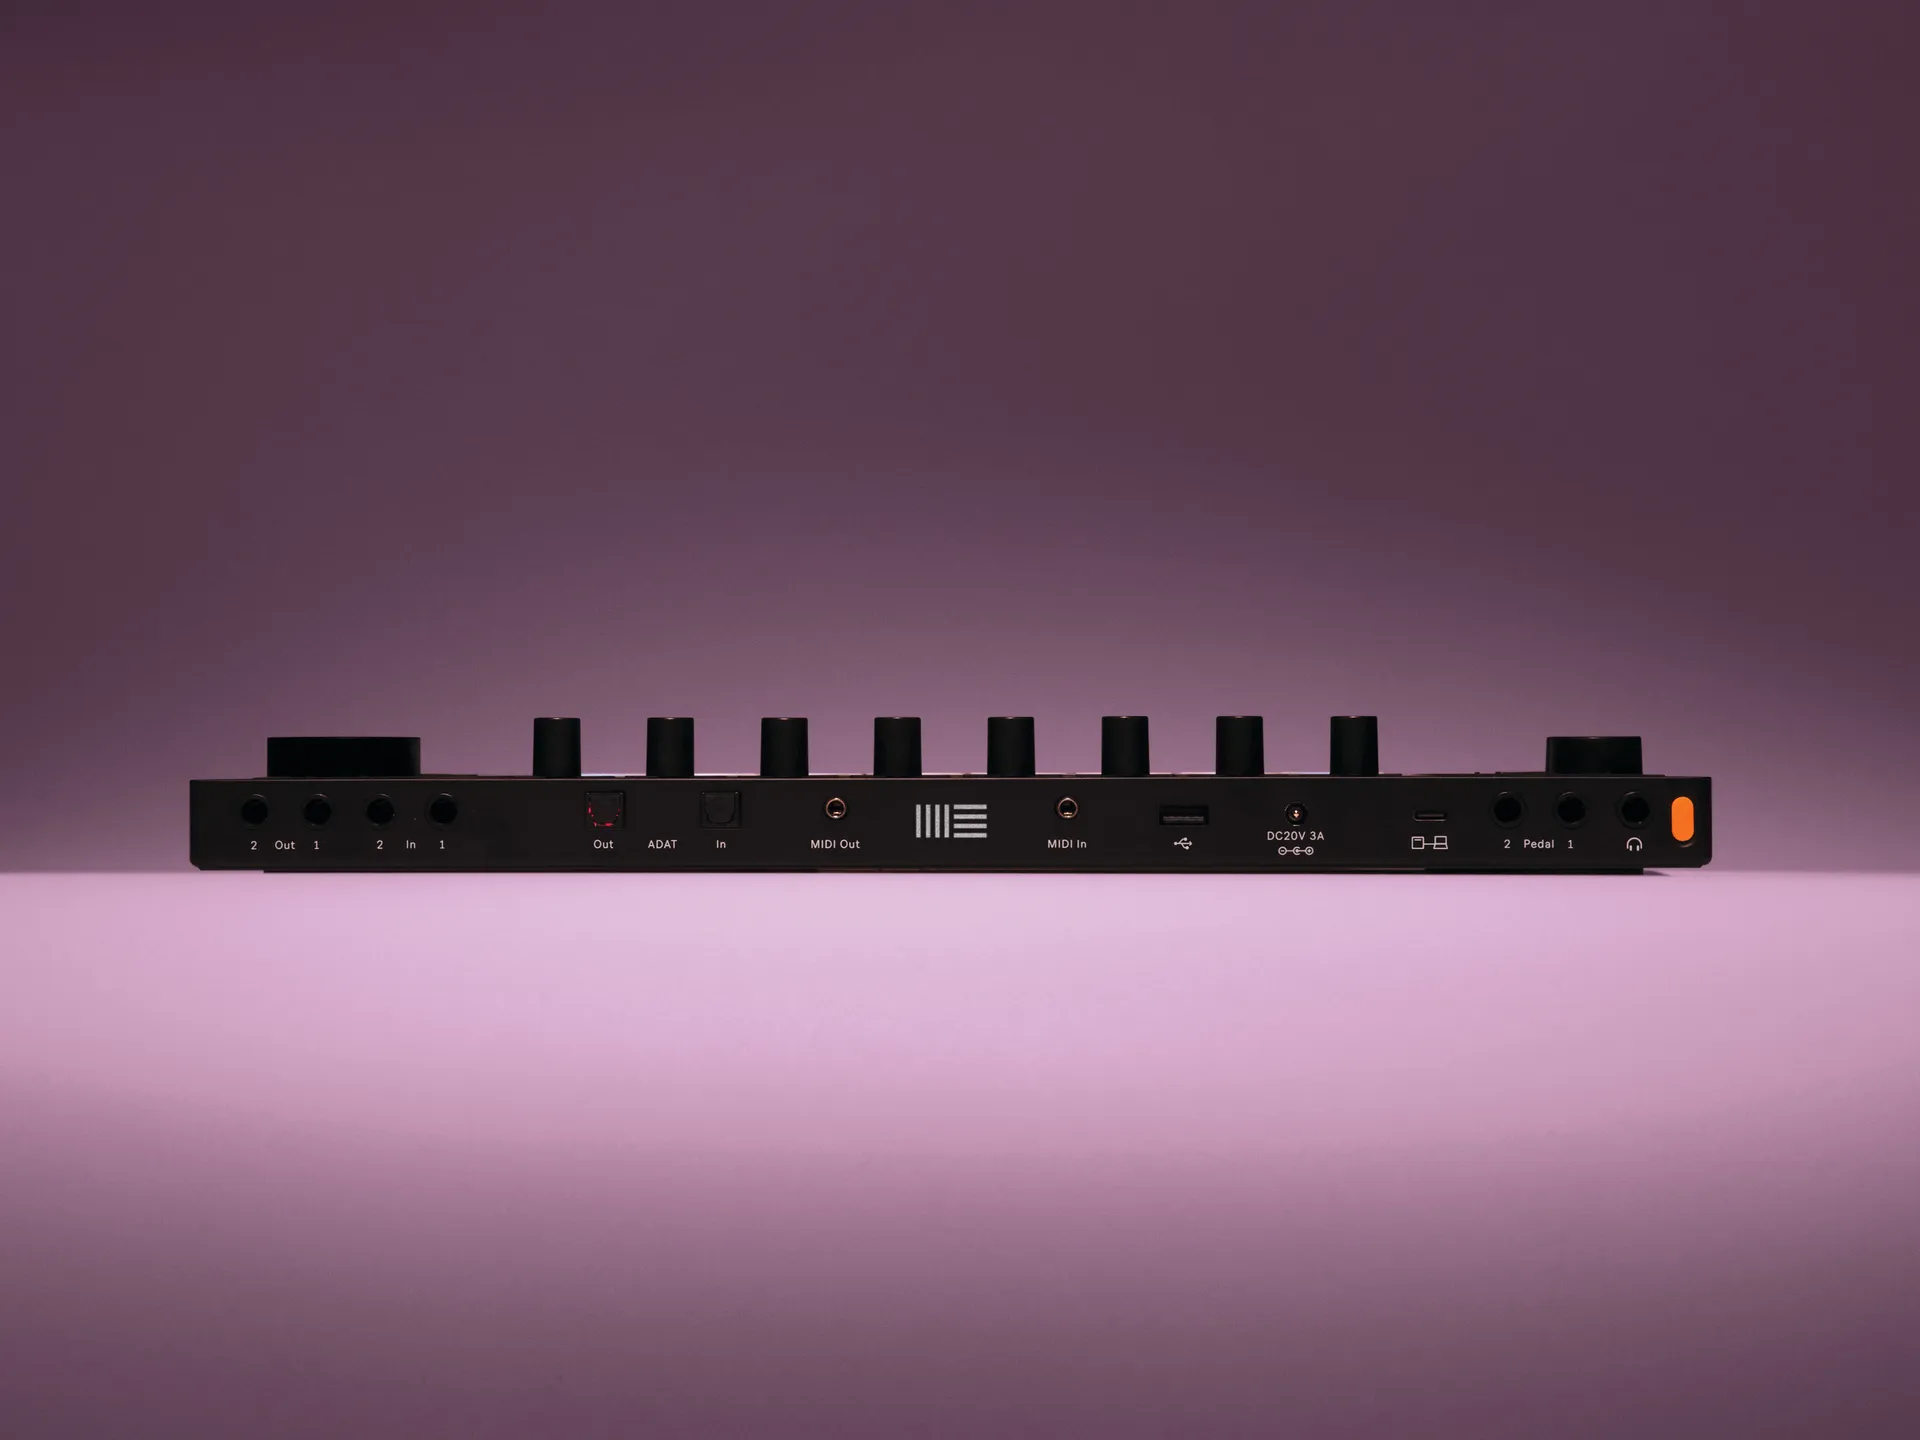 Ableton releases the upgradable Push controller